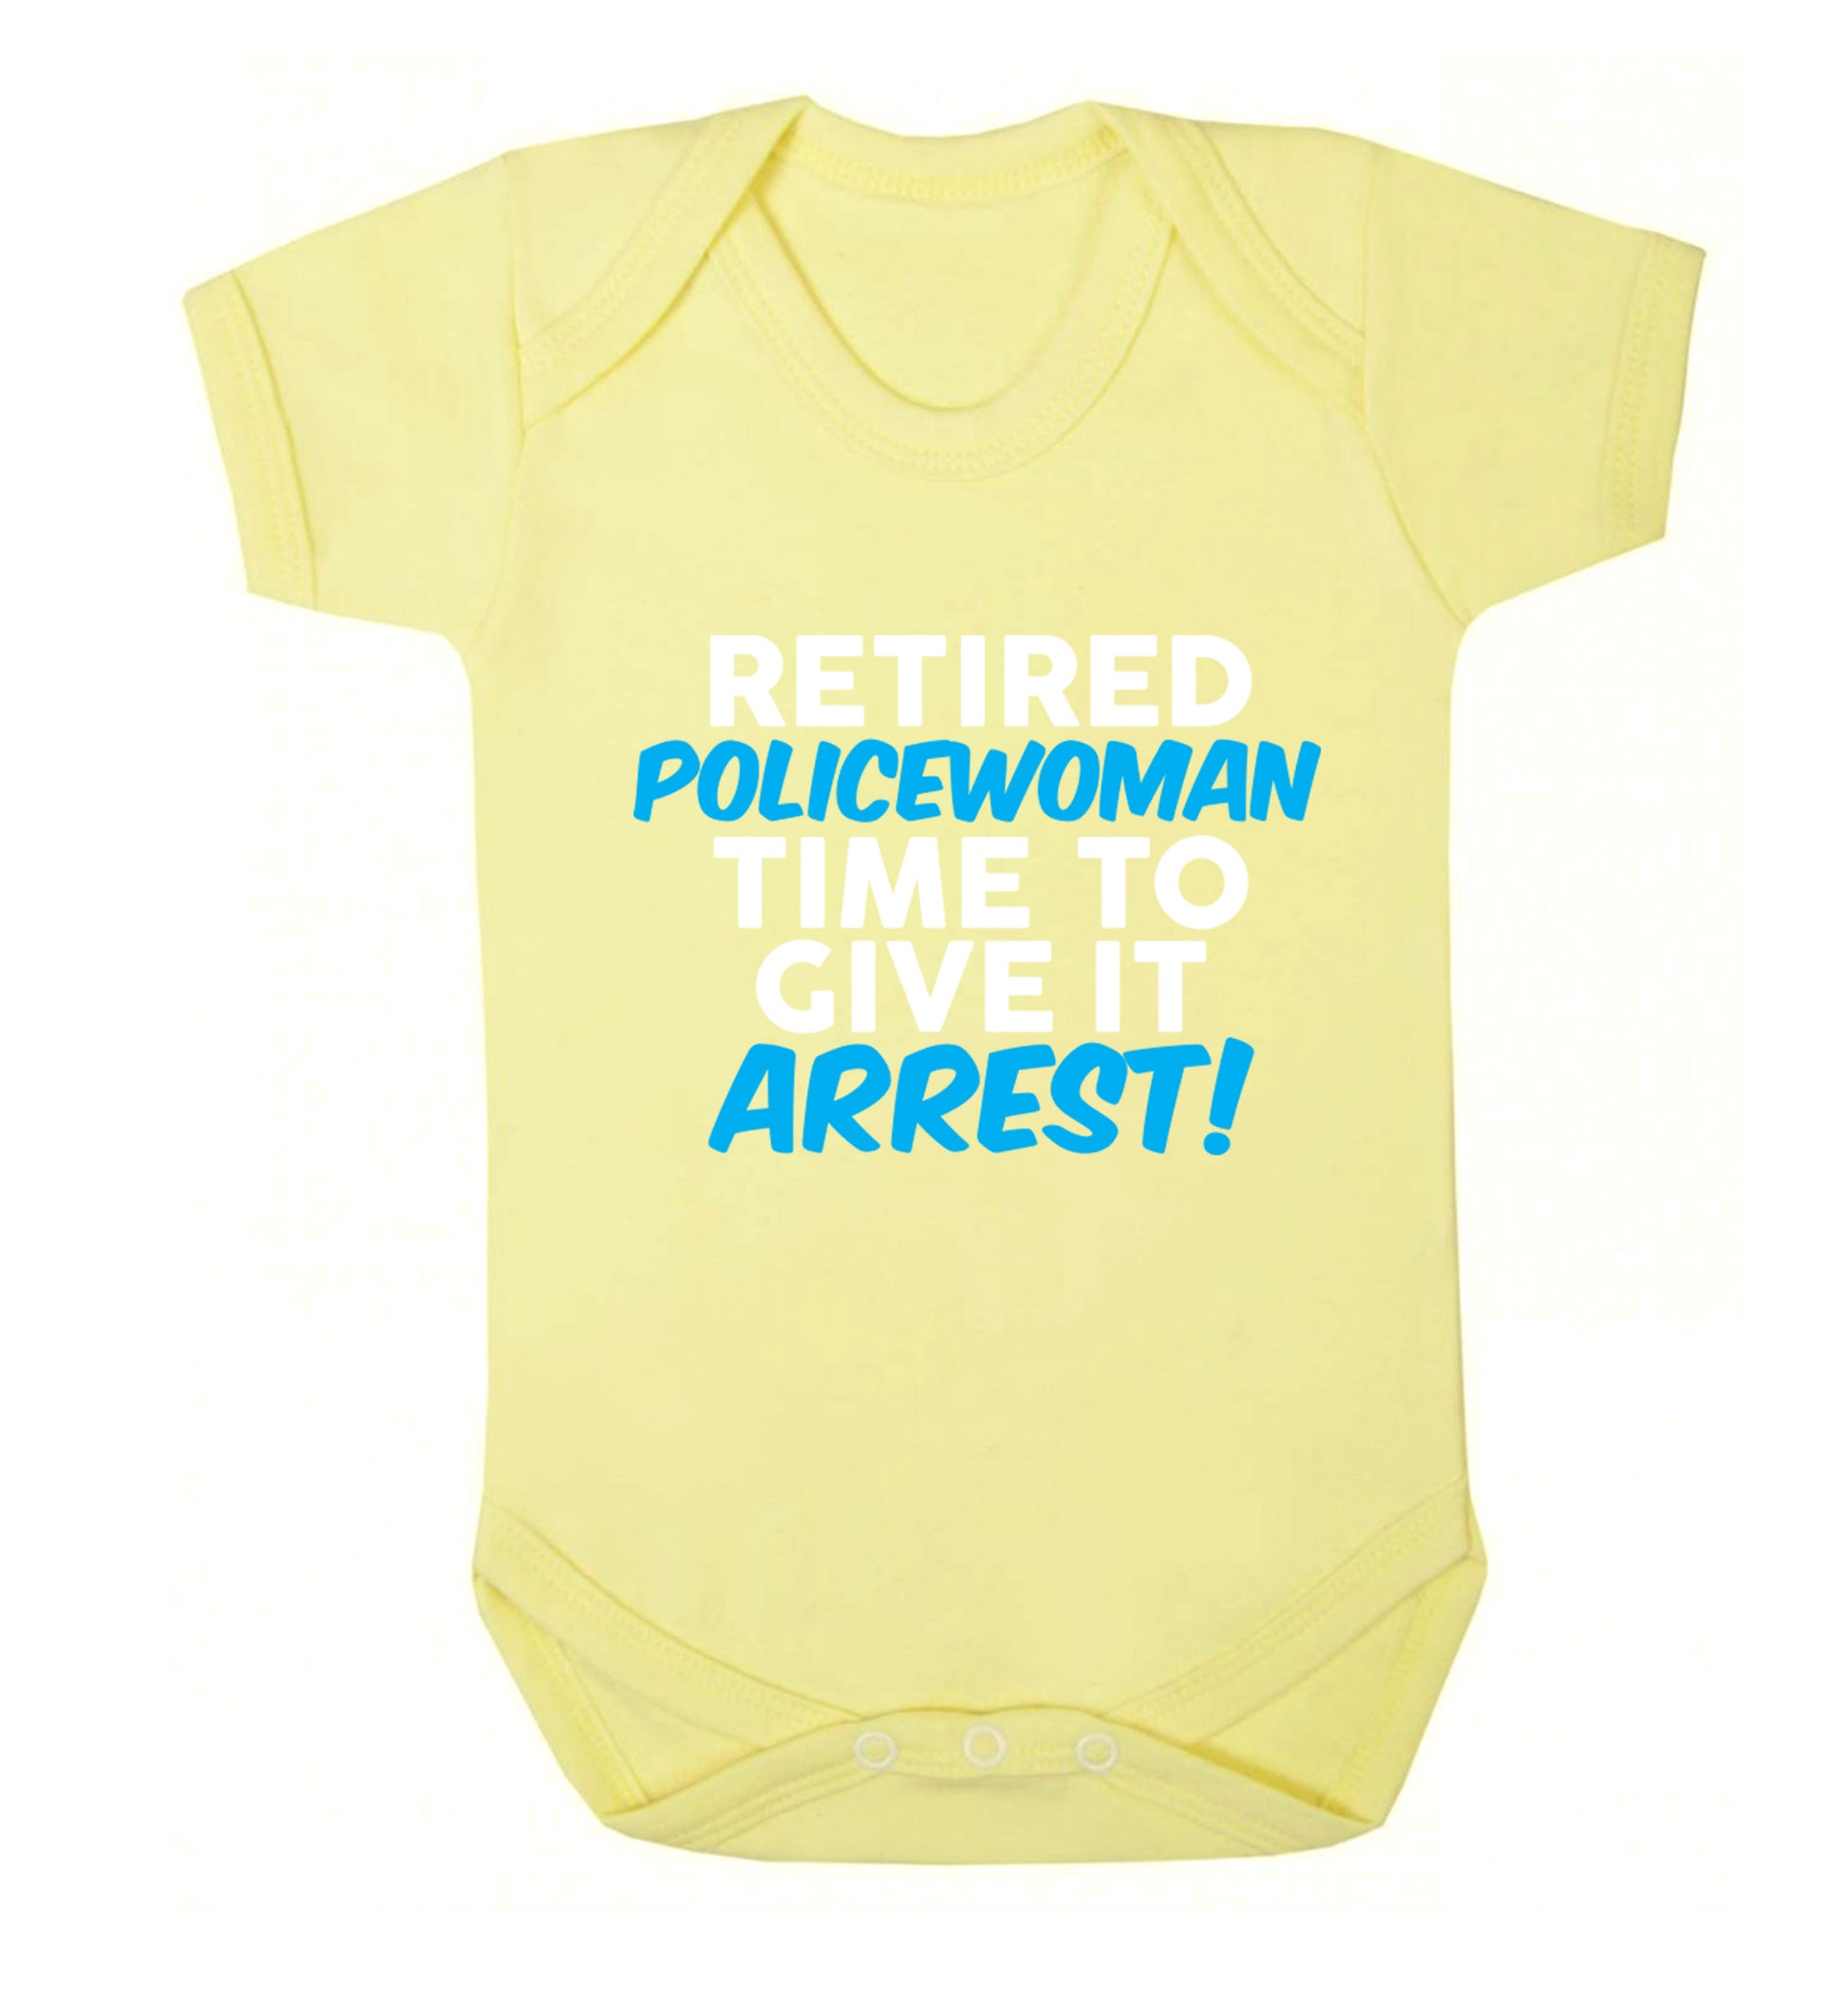 Retired policewoman time to give it arrest Baby Vest pale yellow 18-24 months